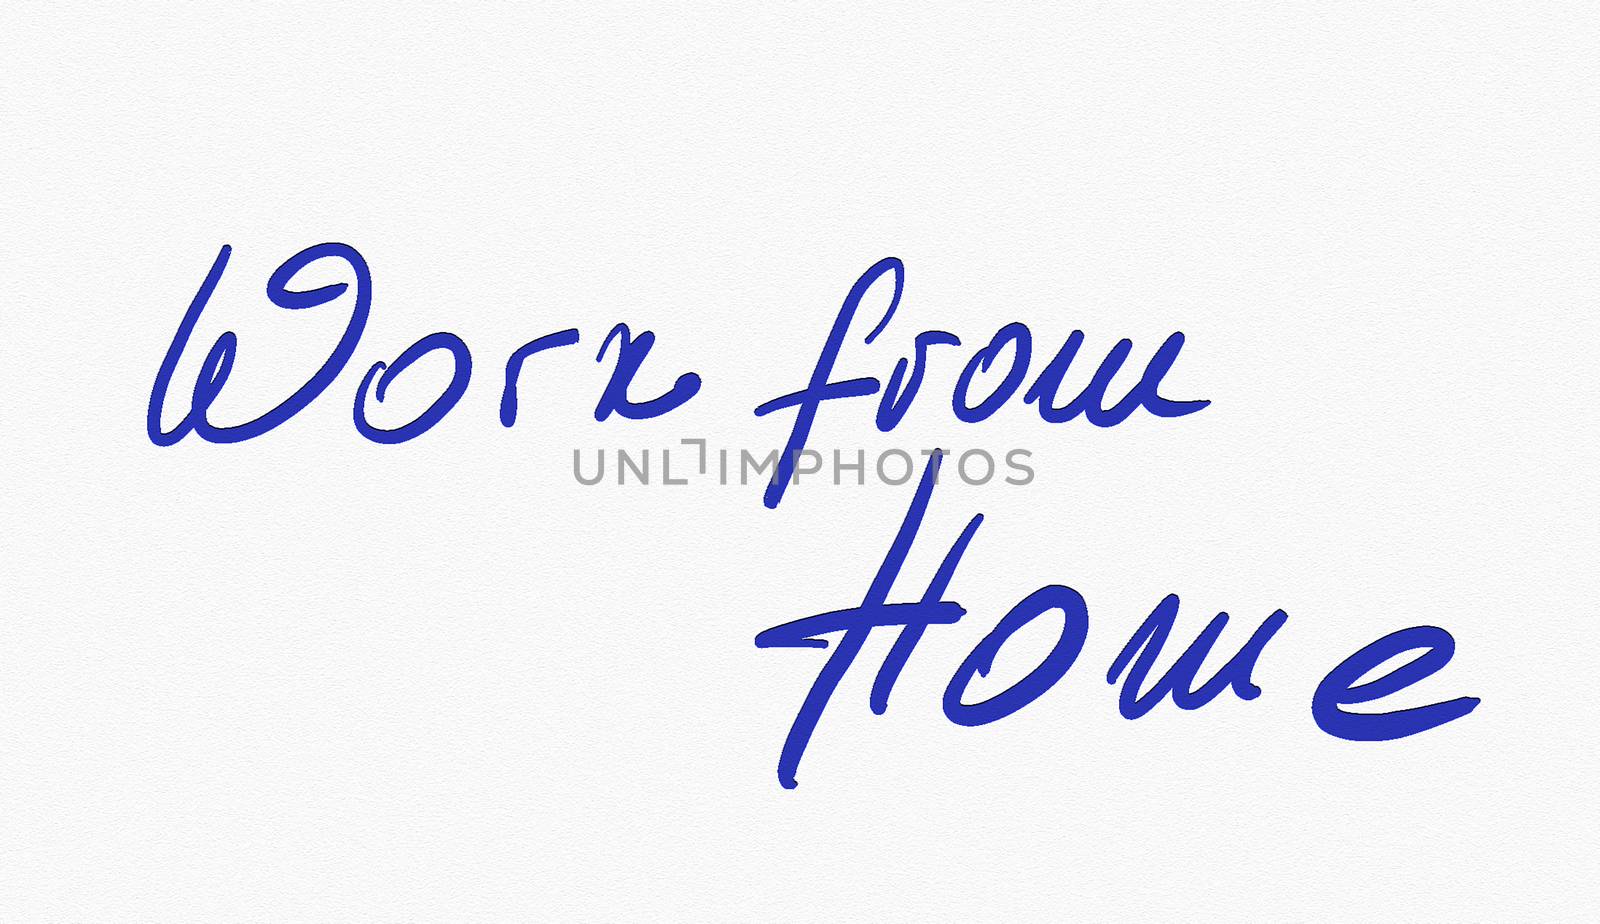 A hand written note of Work from Home words. Home office , Working online , Work form home digitalization business concept. Blue ink on white paper background isolated.